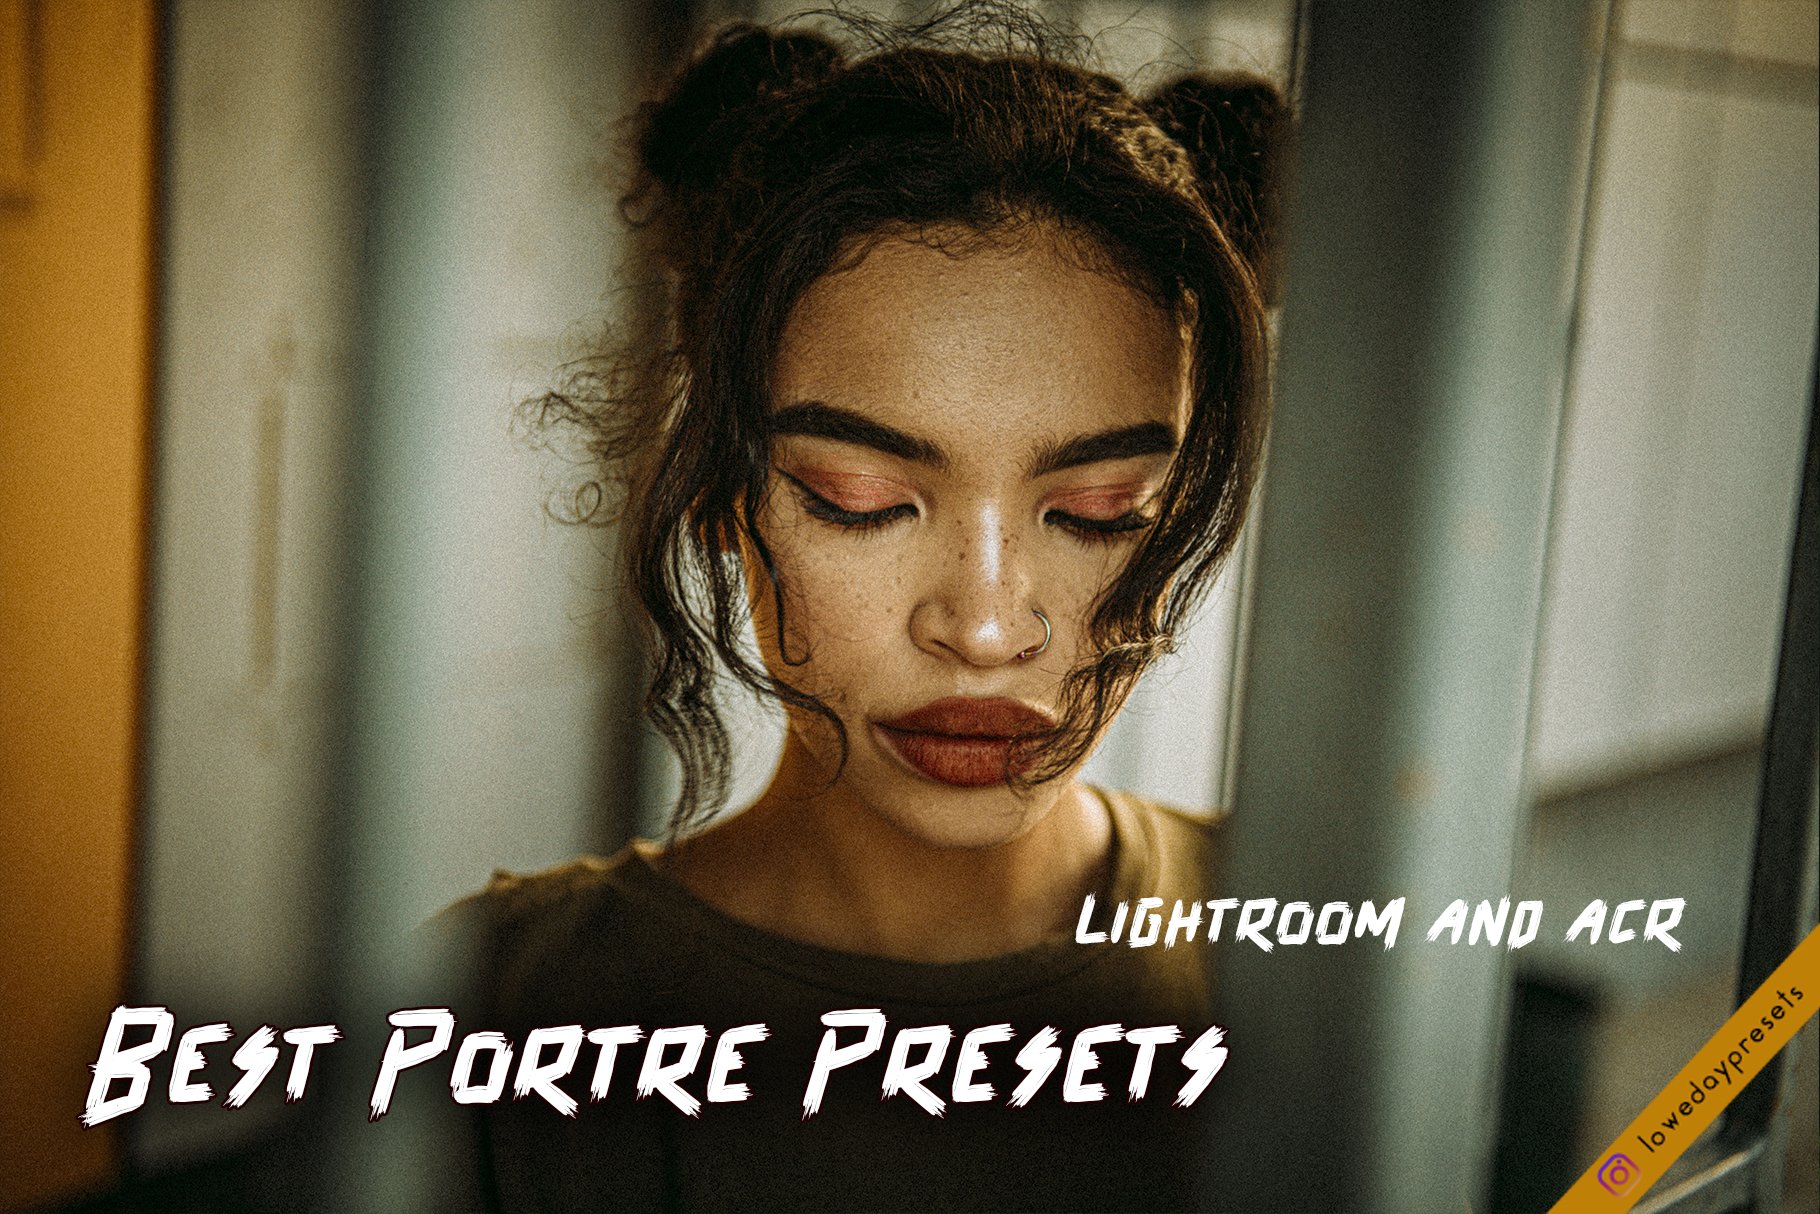 Loweday Portre Presets - LR and ACRcover image.